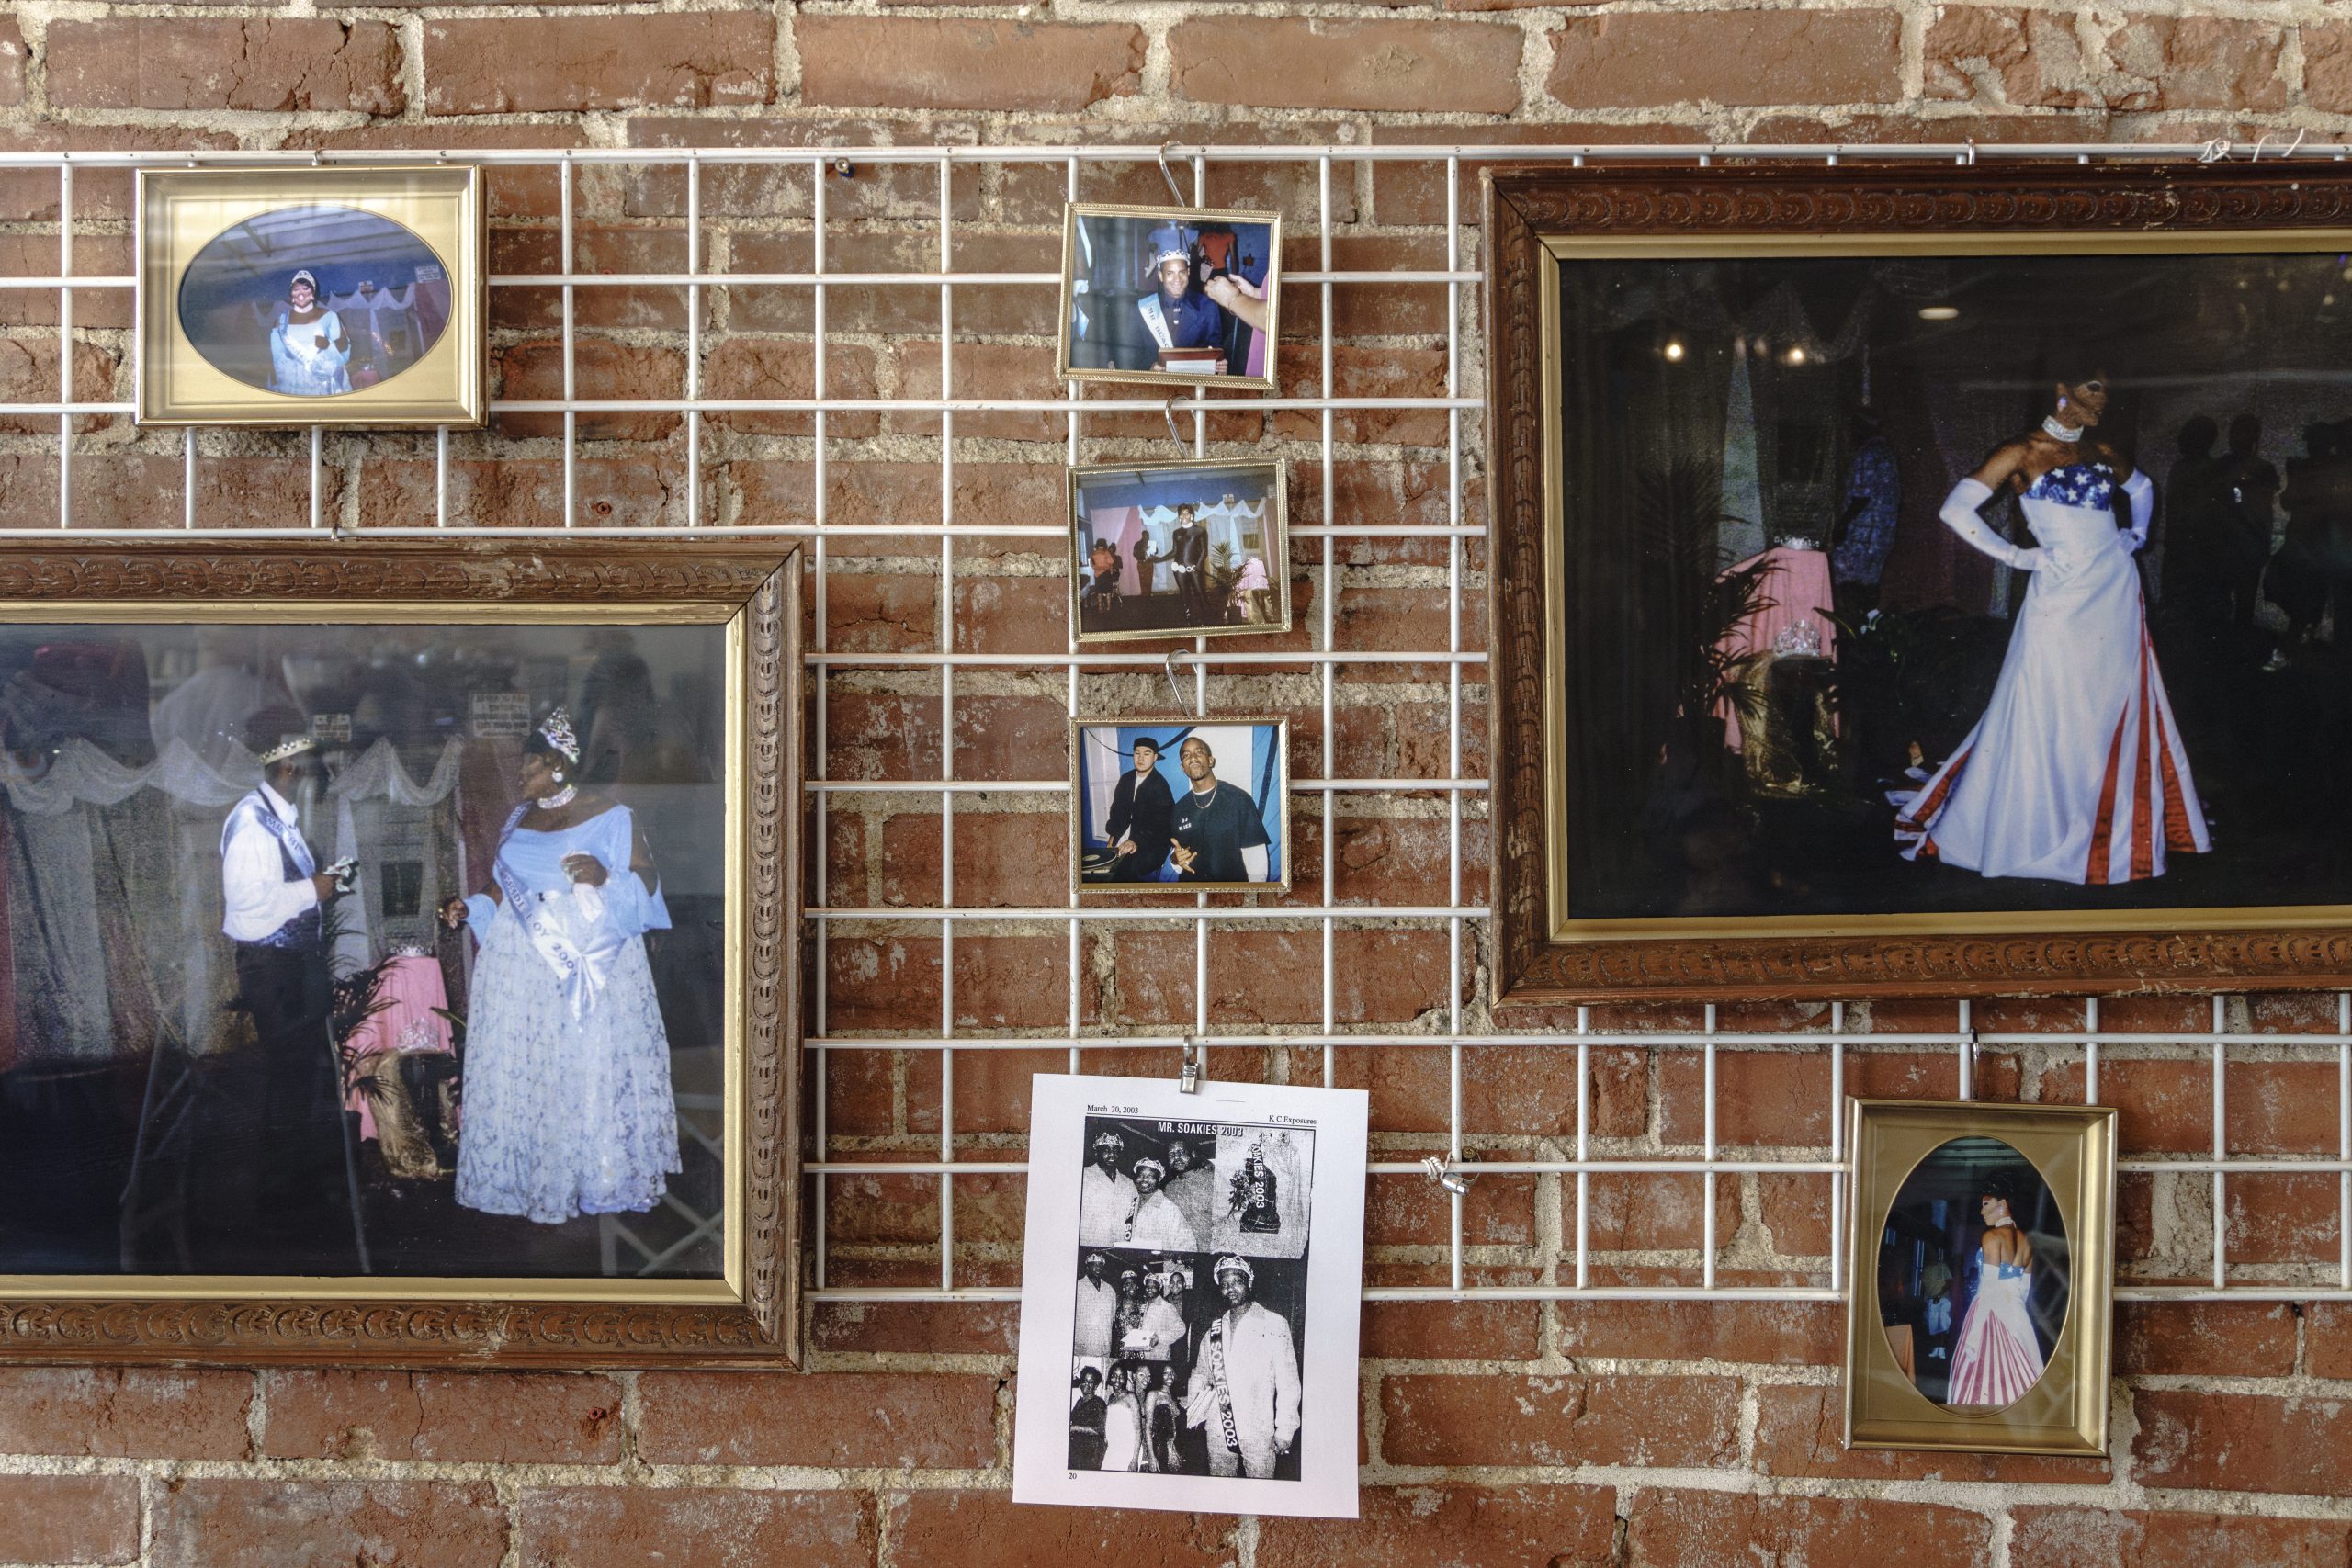 Image: Installation View, {B/qKC}: The Volume_2 Archive Launch Party. Archival photographs of queer pageant culture set on a brick wall. There are two large framed photos in the bottom left and the upper right of pageants. Photo by Gabriella Salinas.